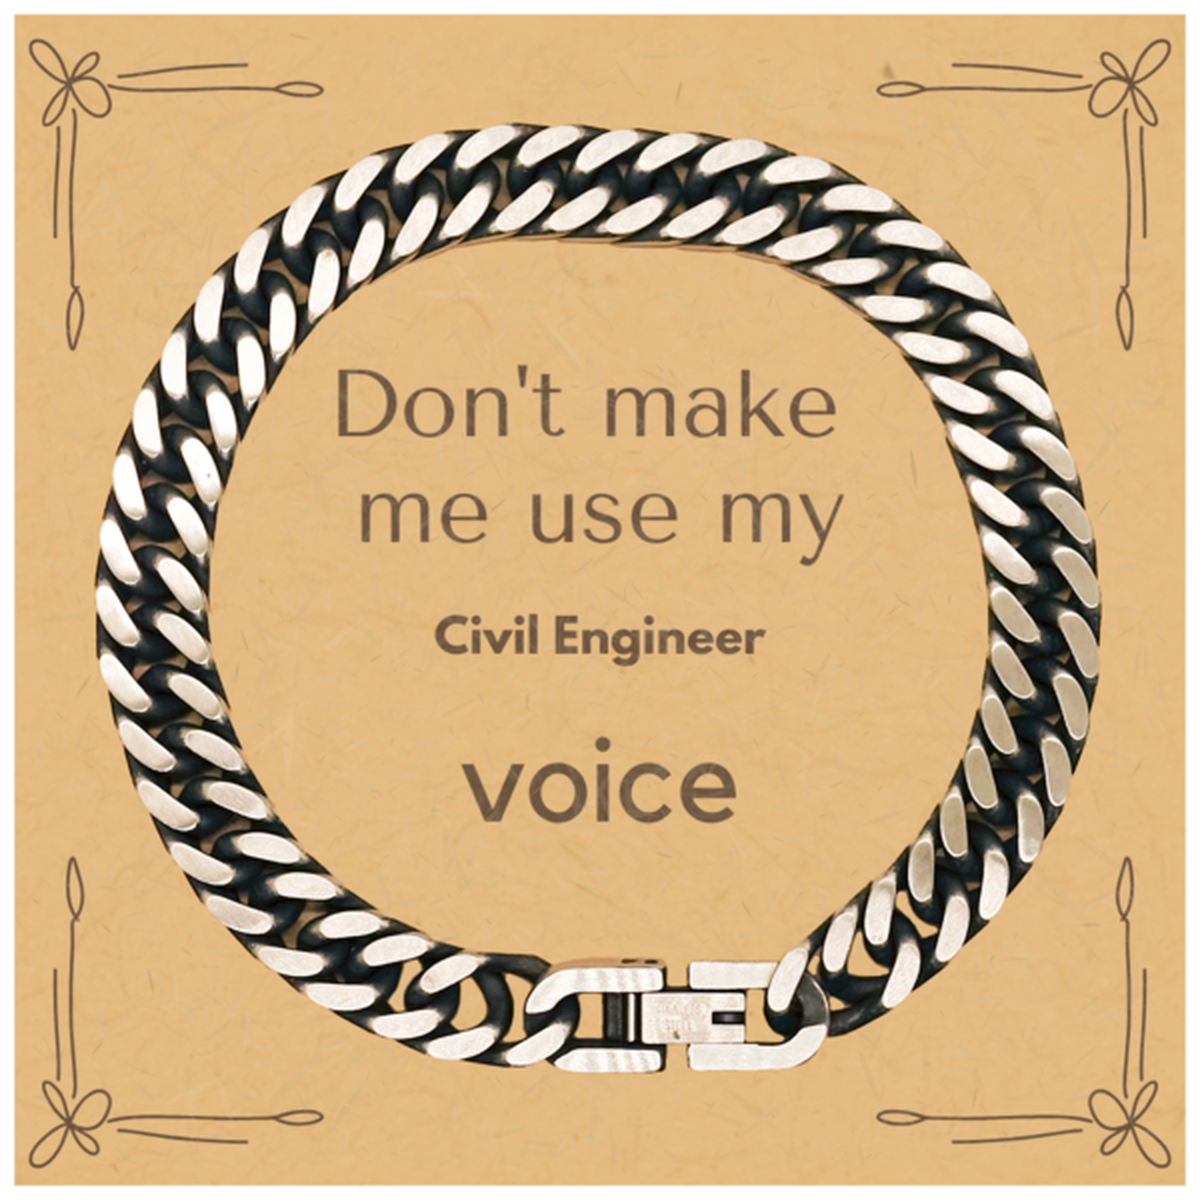 Don't make me use my Civil Engineer voice, Sarcasm Civil Engineer Card Gifts, Christmas Civil Engineer Cuban Link Chain Bracelet Birthday Unique Gifts For Civil Engineer Coworkers, Men, Women, Colleague, Friends